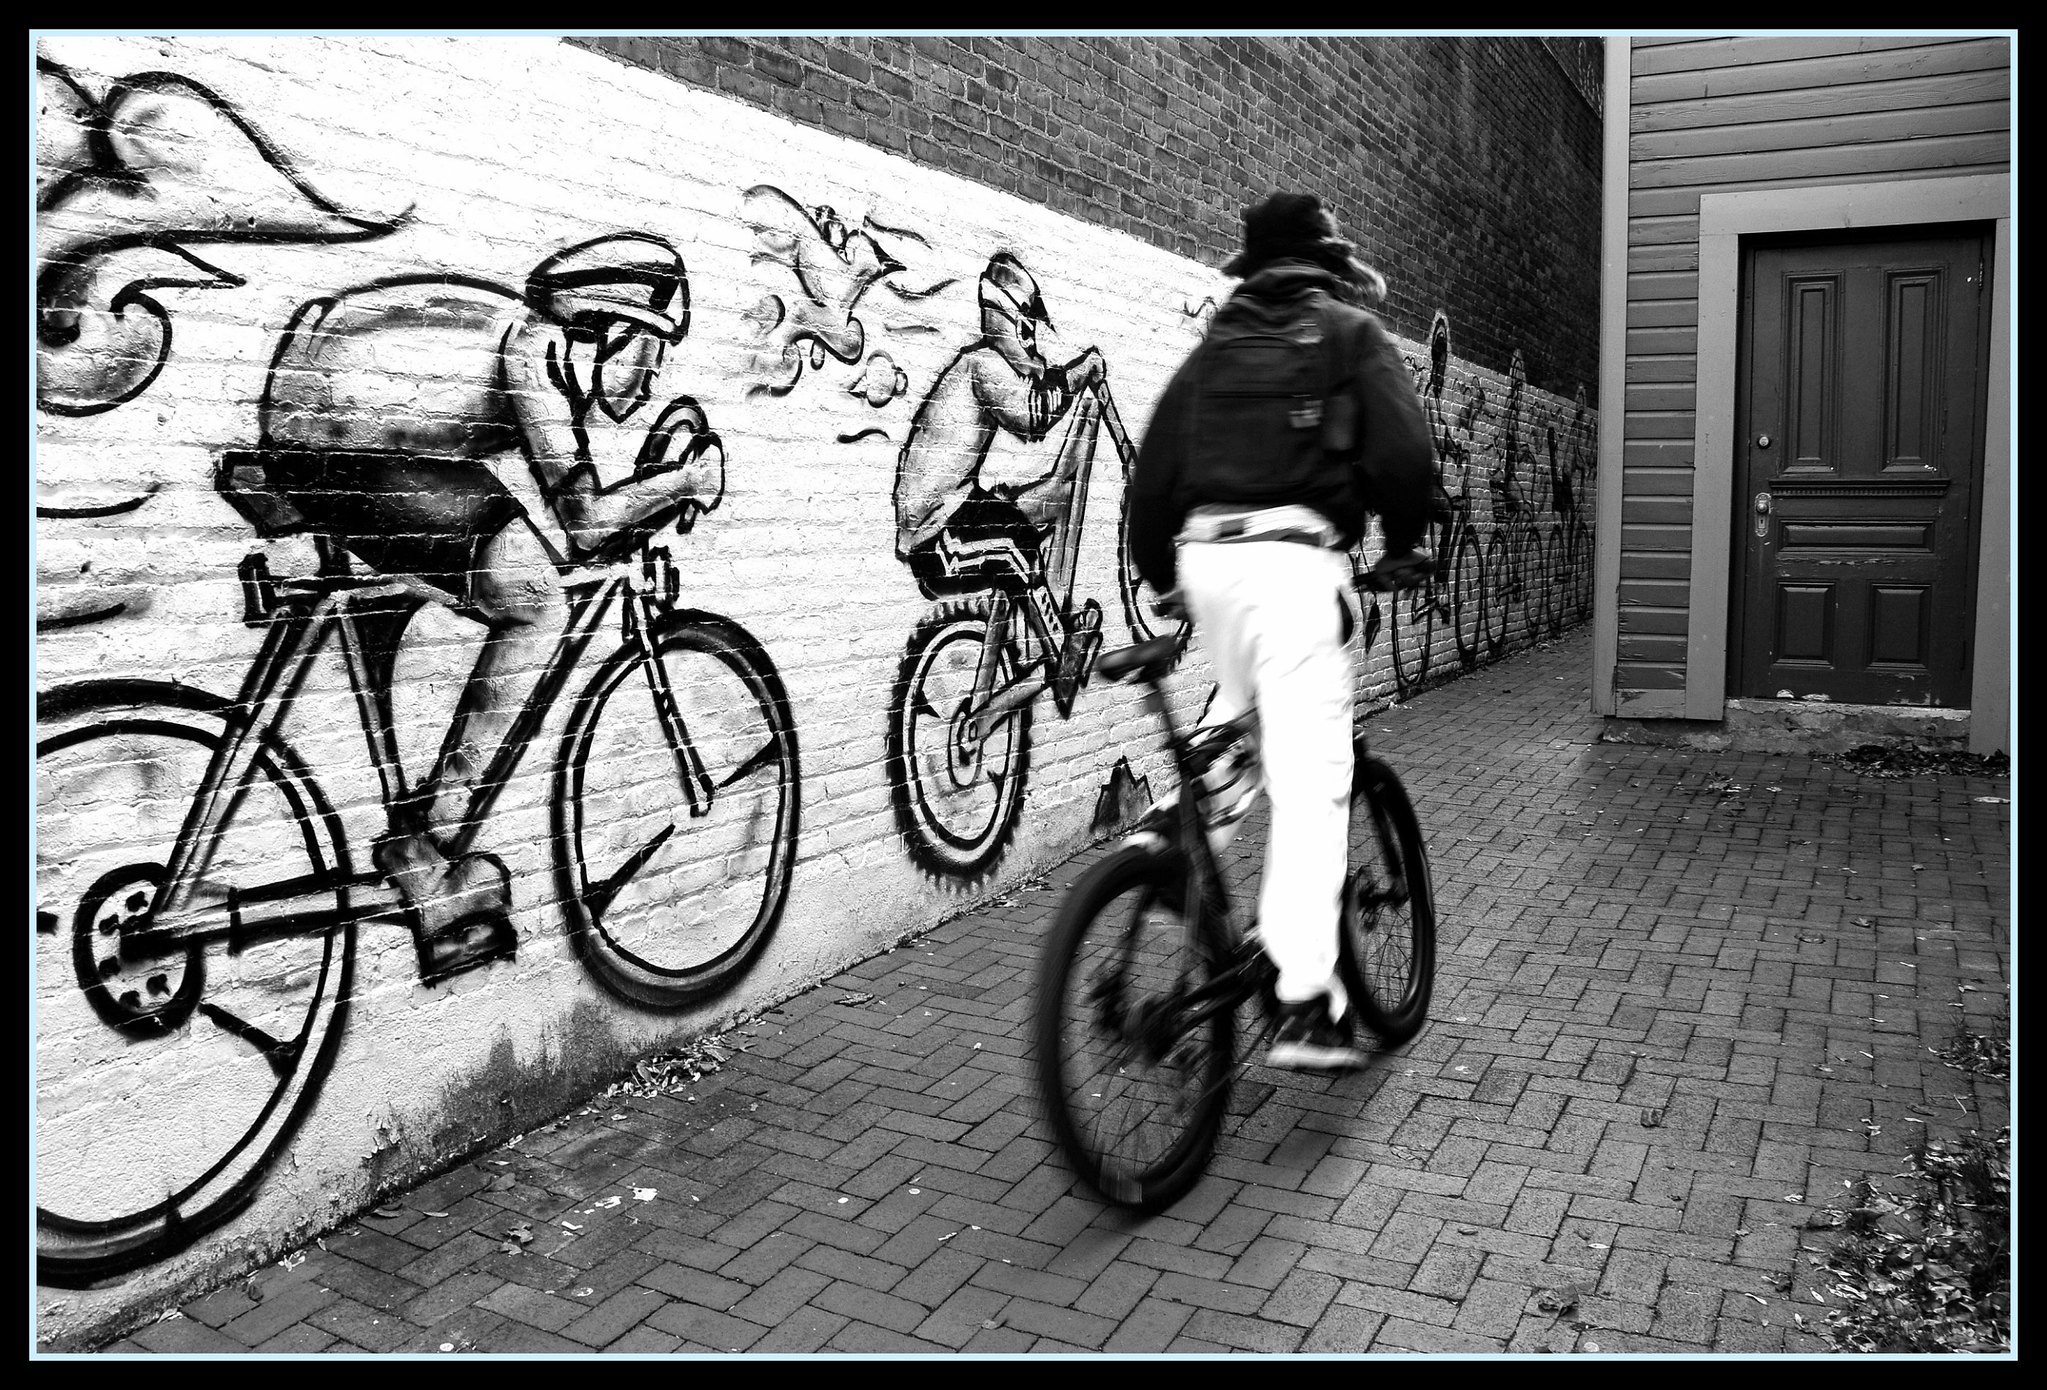 Someone biking down an alley with a mural of bikers in the background.